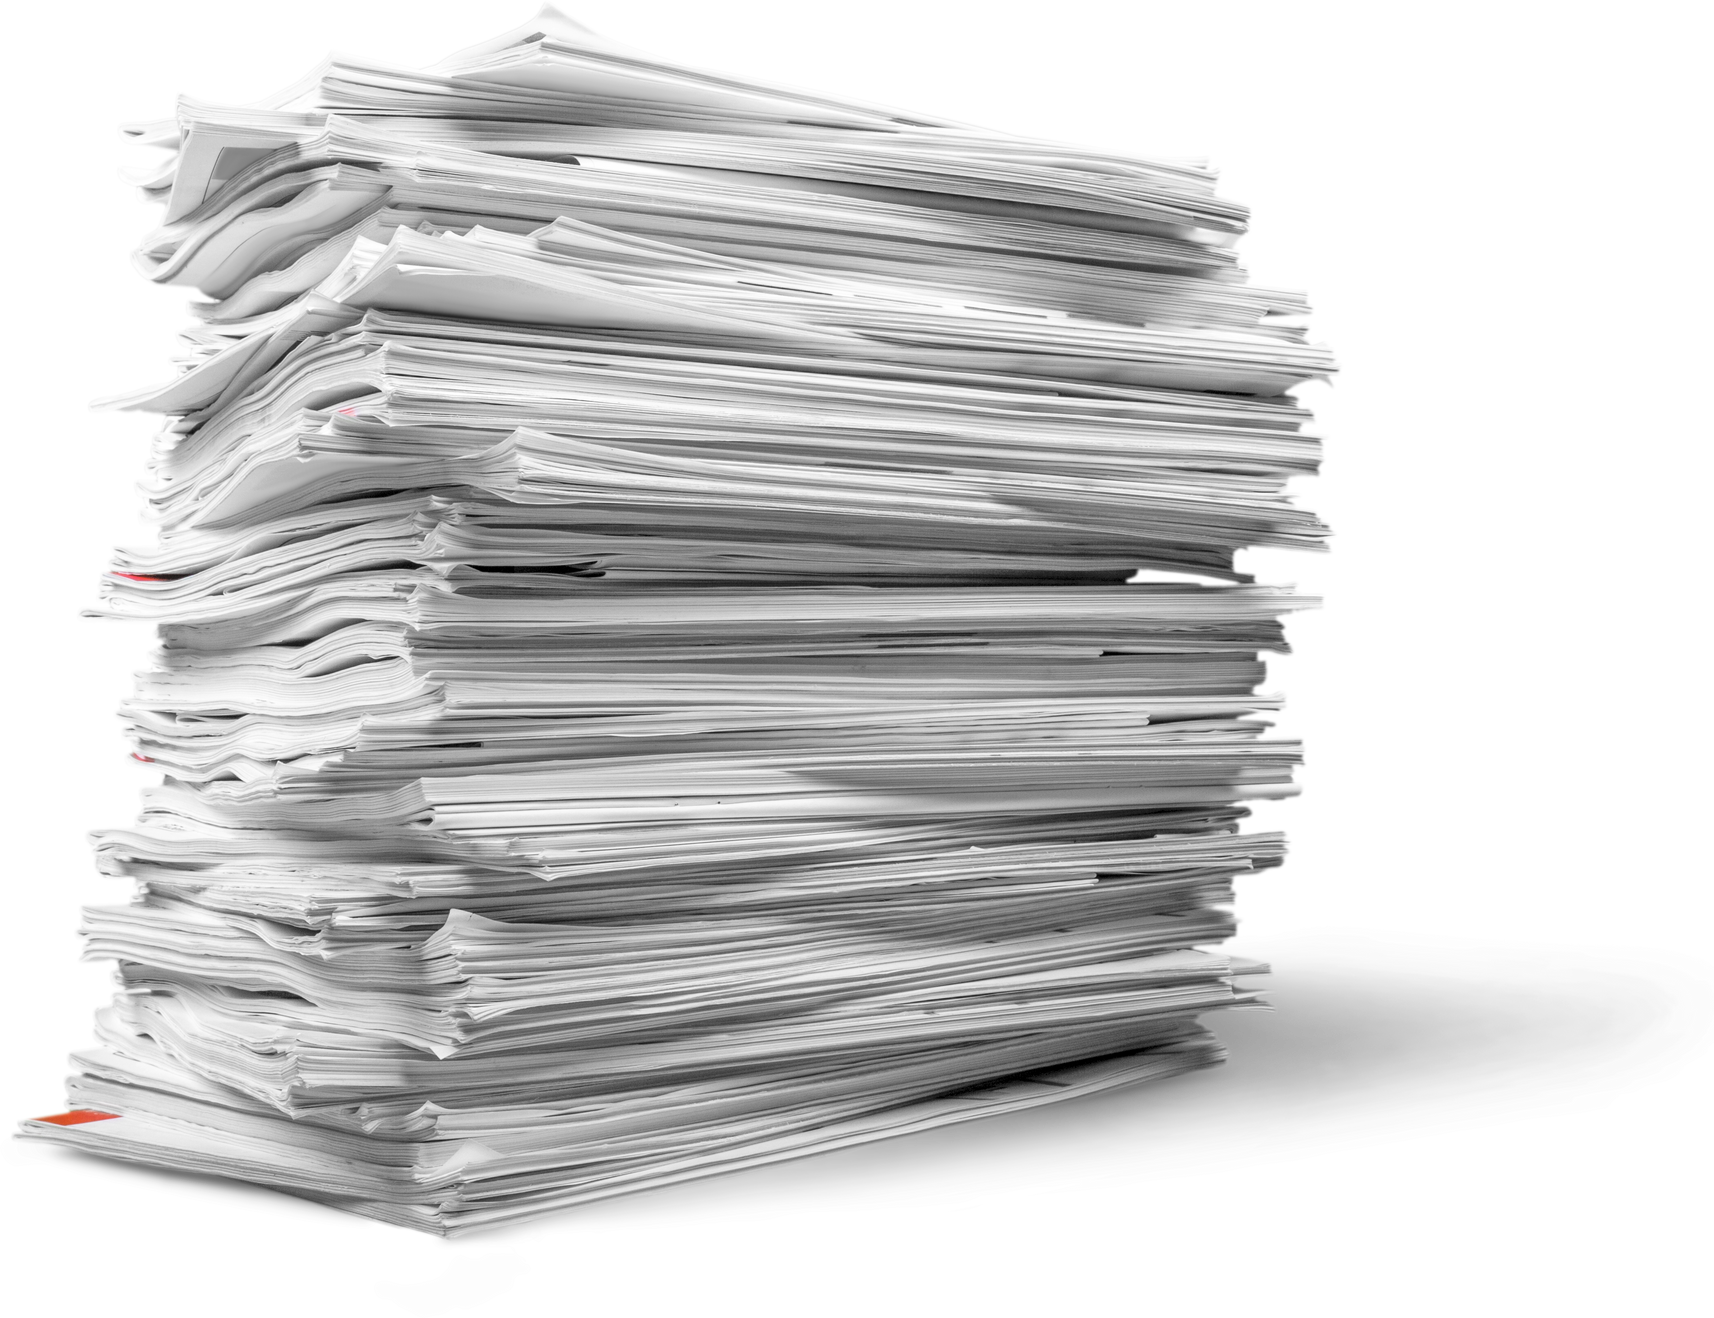 Pile of White Paper